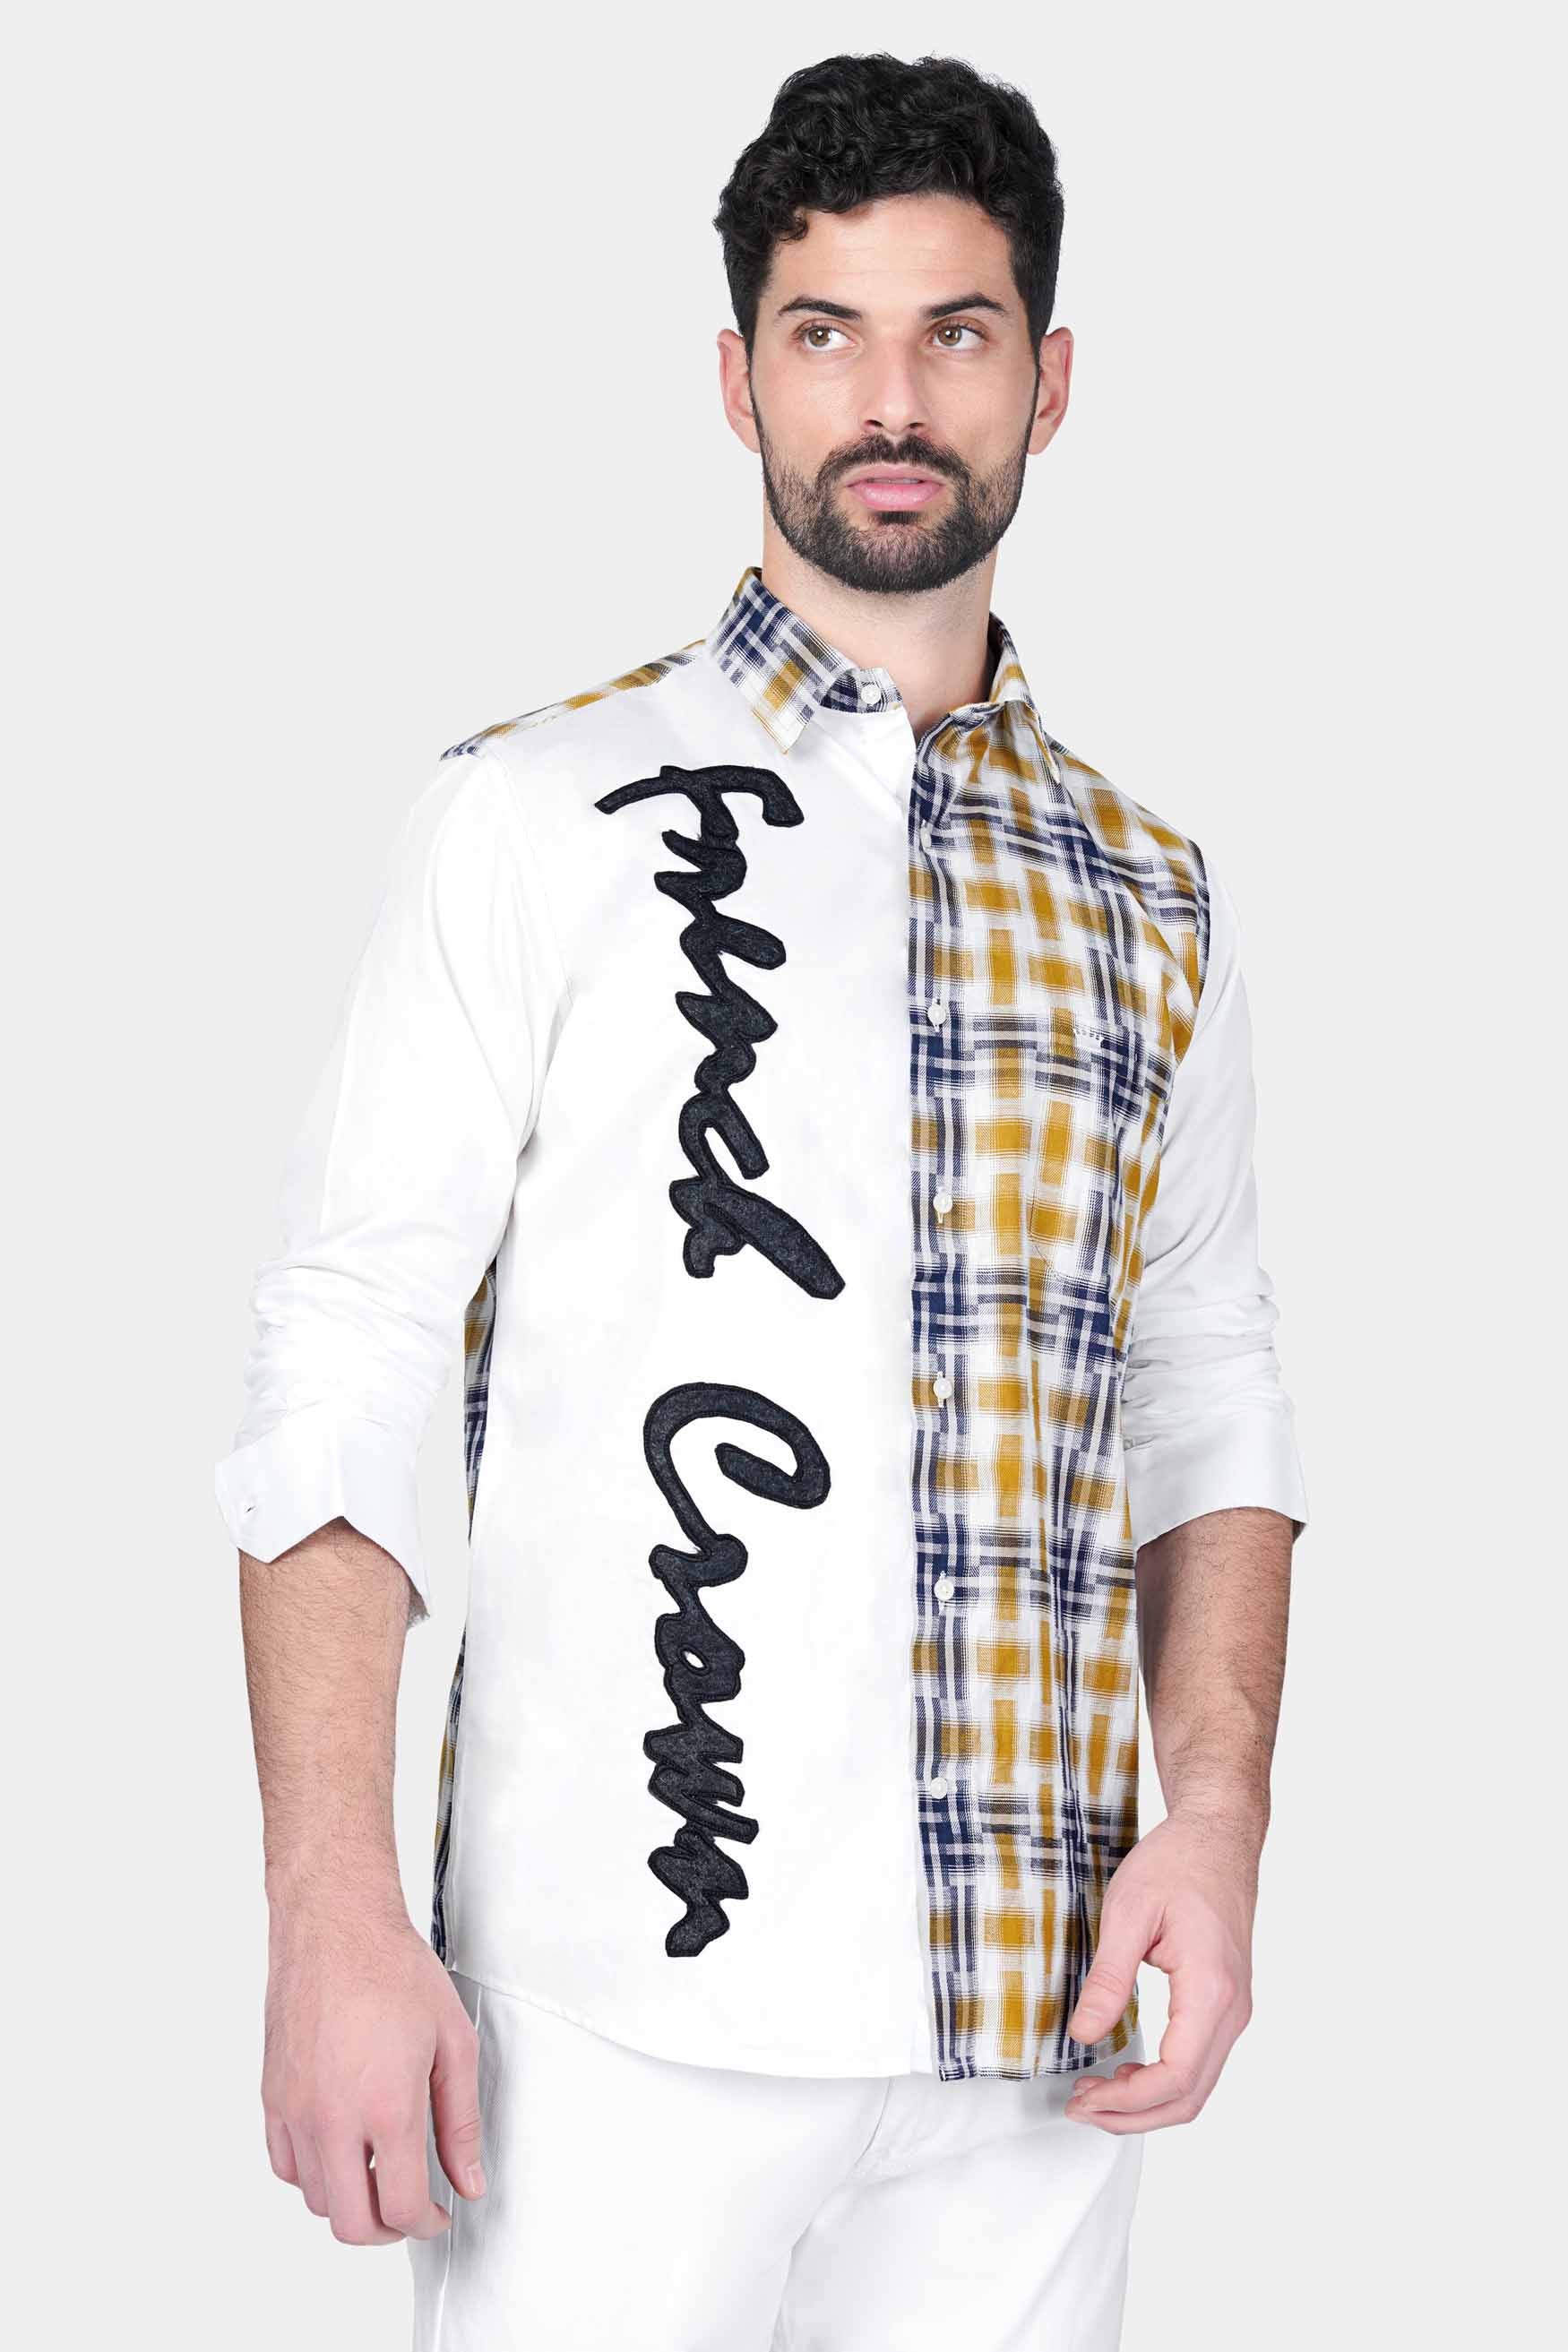 Bright White and Museli Brown Checkered and Brand Name Patch work Twill Premium Cotton Designer Shirt 6650-D5-E136-38, 6650-D5-E136-H-38, 6650-D5-E136-39, 6650-D5-E136-H-39, 6650-D5-E136-40, 6650-D5-E136-H-40, 6650-D5-E136-42, 6650-D5-E136-H-42, 6650-D5-E136-44, 6650-D5-E136-H-44, 6650-D5-E136-46, 6650-D5-E136-H-46, 6650-D5-E136-48, 6650-D5-E136-H-48, 6650-D5-E136-50, 6650-D5-E136-H-50, 6650-D5-E136-52, 6650-D5-E136-H-52